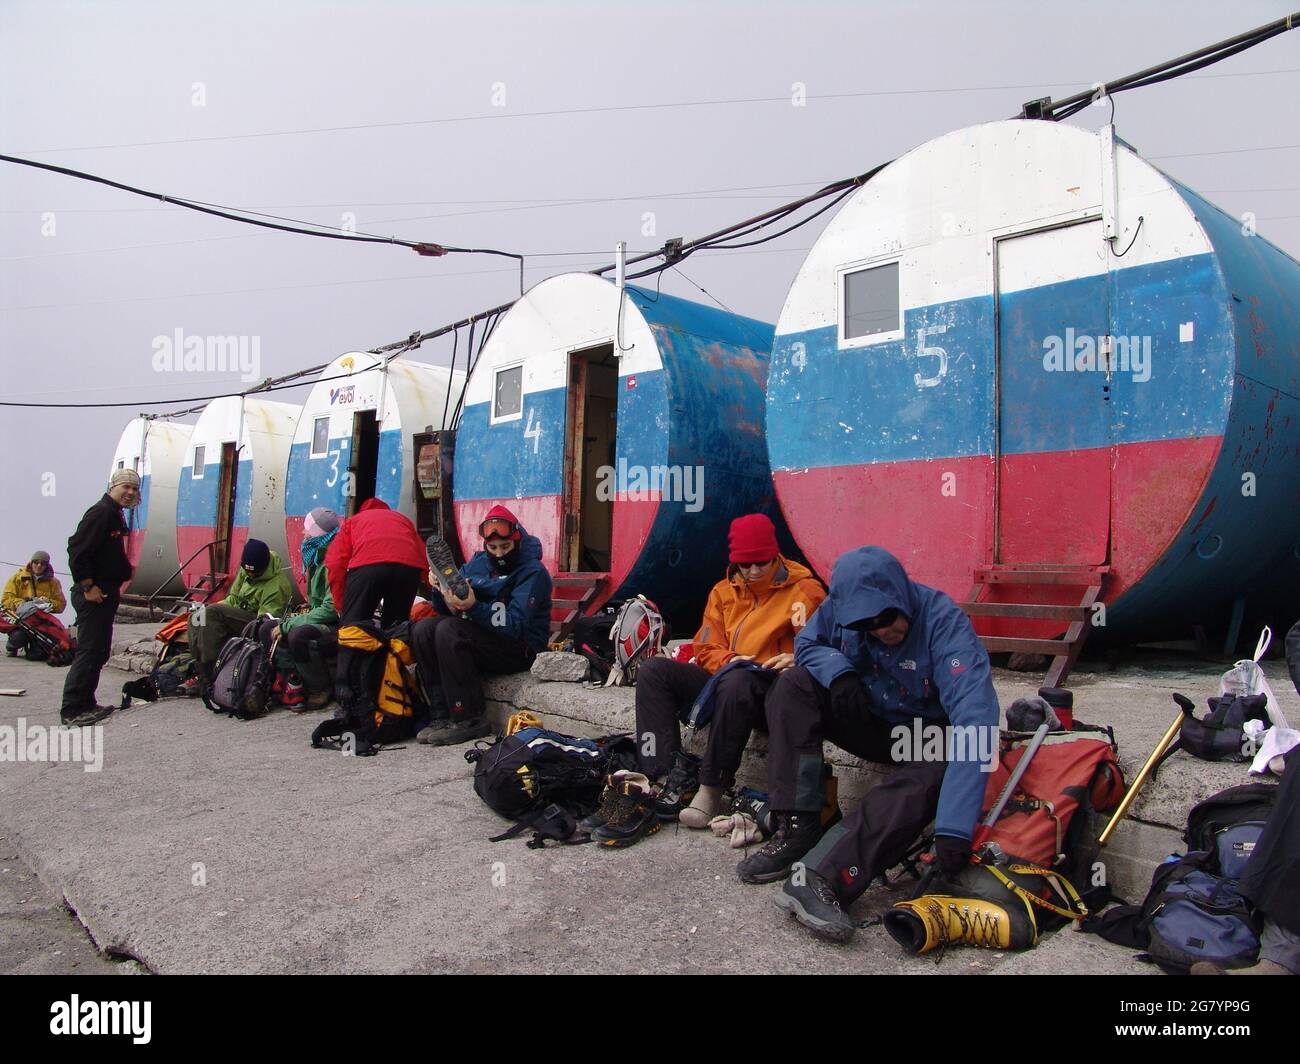 MINERALNYE VODY, RUSSIA - Aug 14, 2010: The Barrels Camp is the most popular accommodation option for climbers on the slopes of Elbrus, on Garabashi h Stock Photo